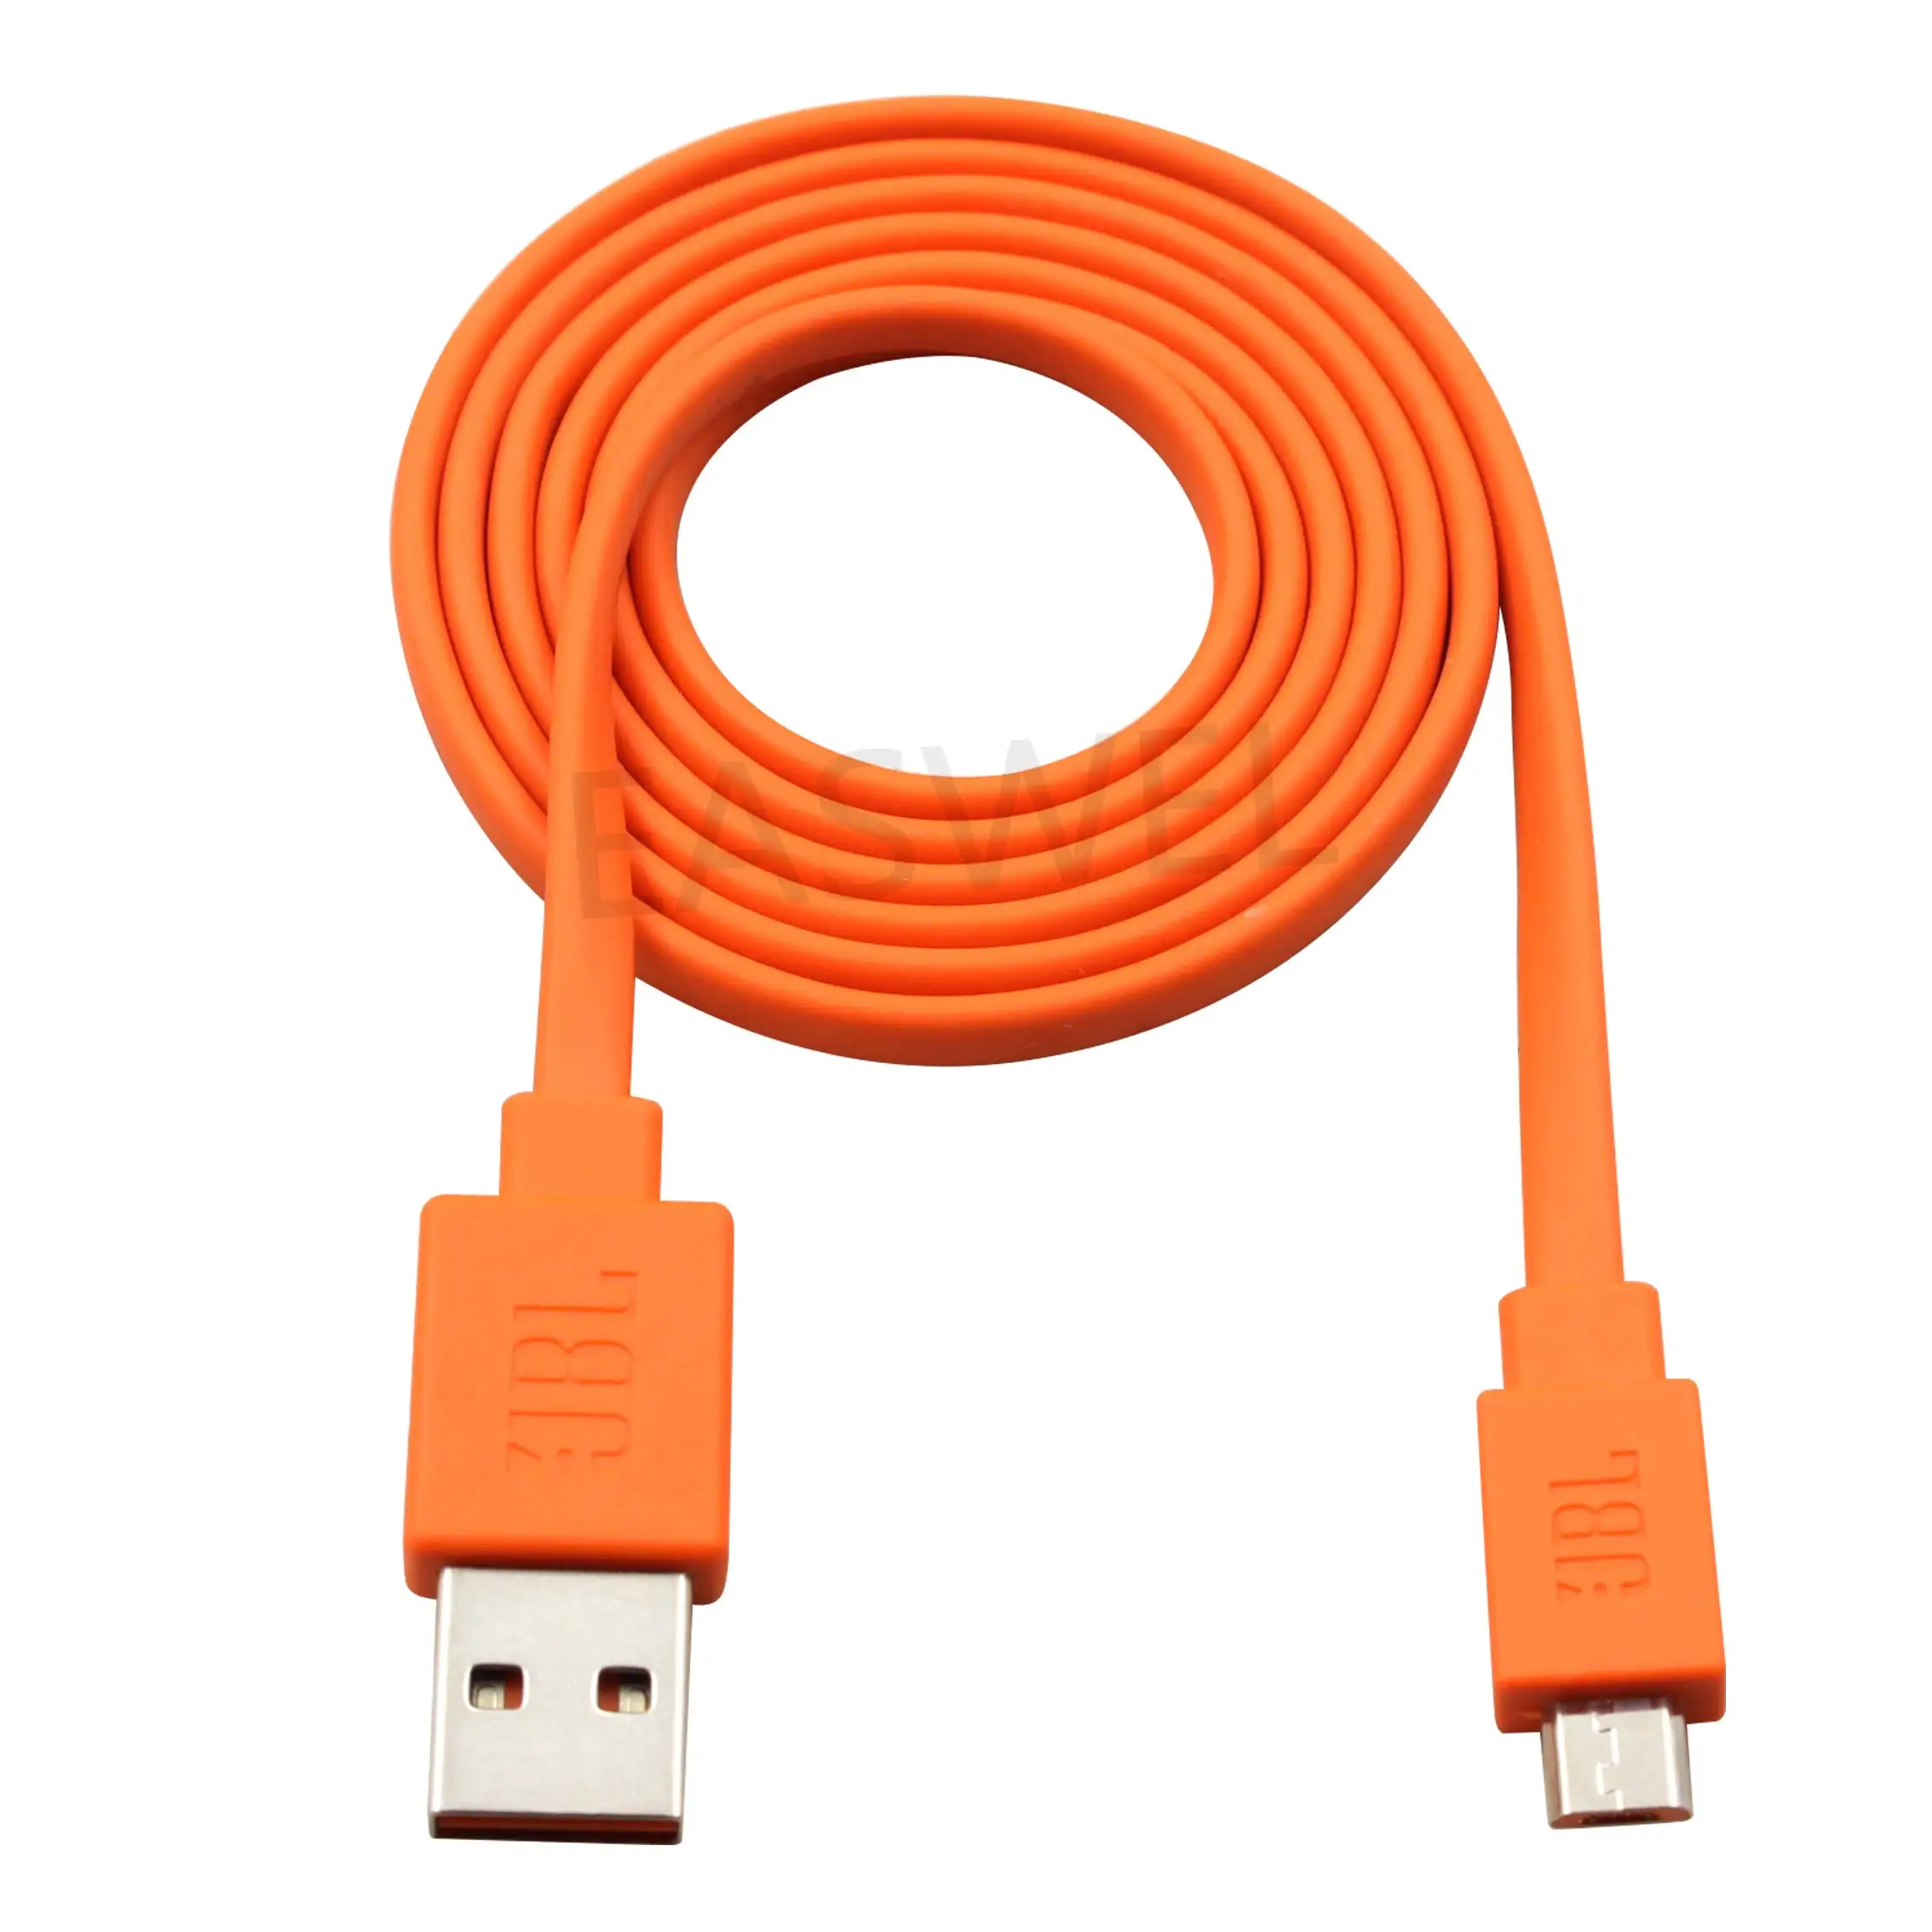 Charger Orange Cable For Jbl Charge 2+ Flip Bluetooth Speaker - Ac/dc Adapters - AliExpress